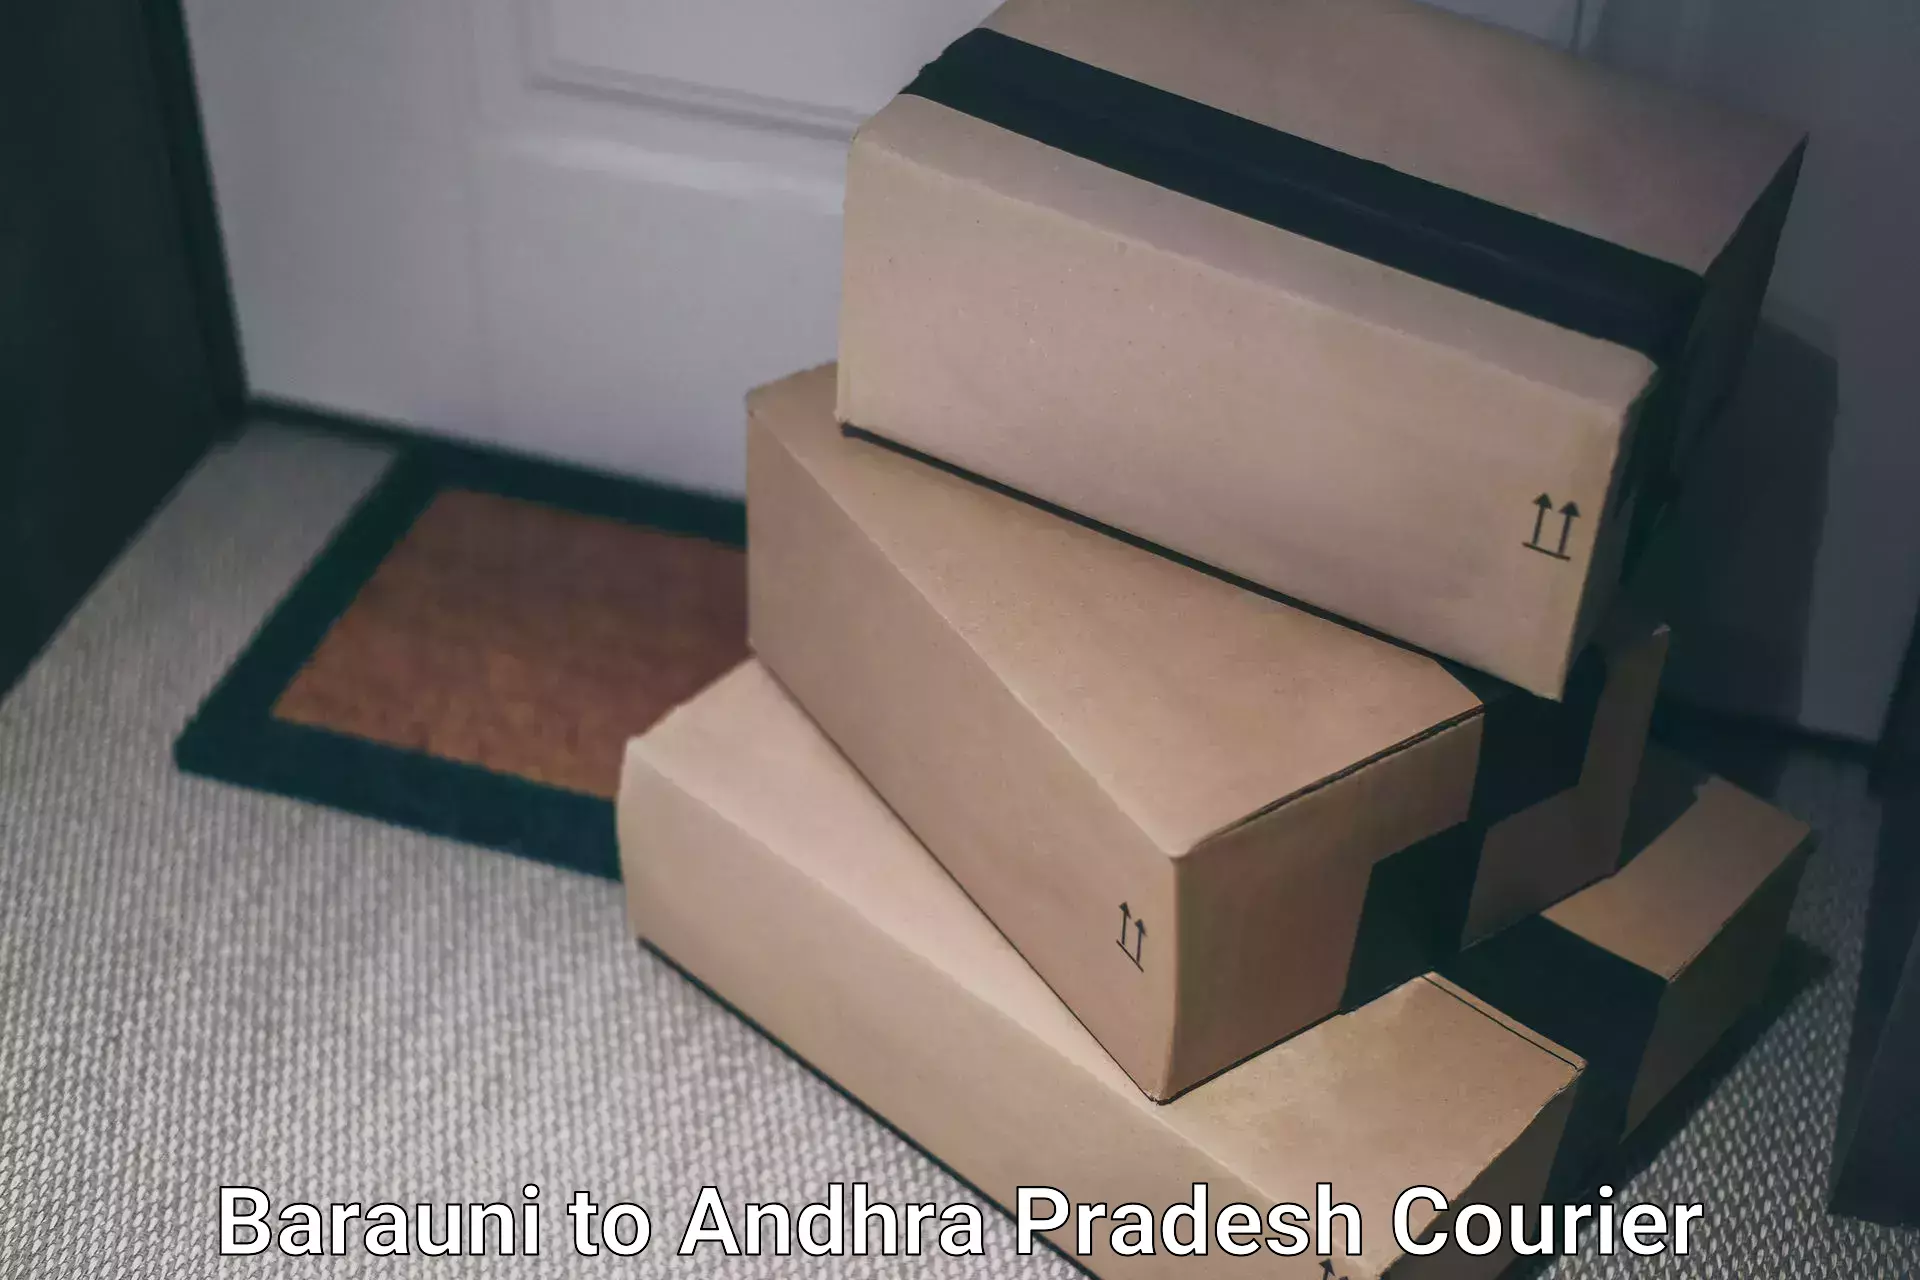 Sustainable shipping practices Barauni to Andhra Pradesh